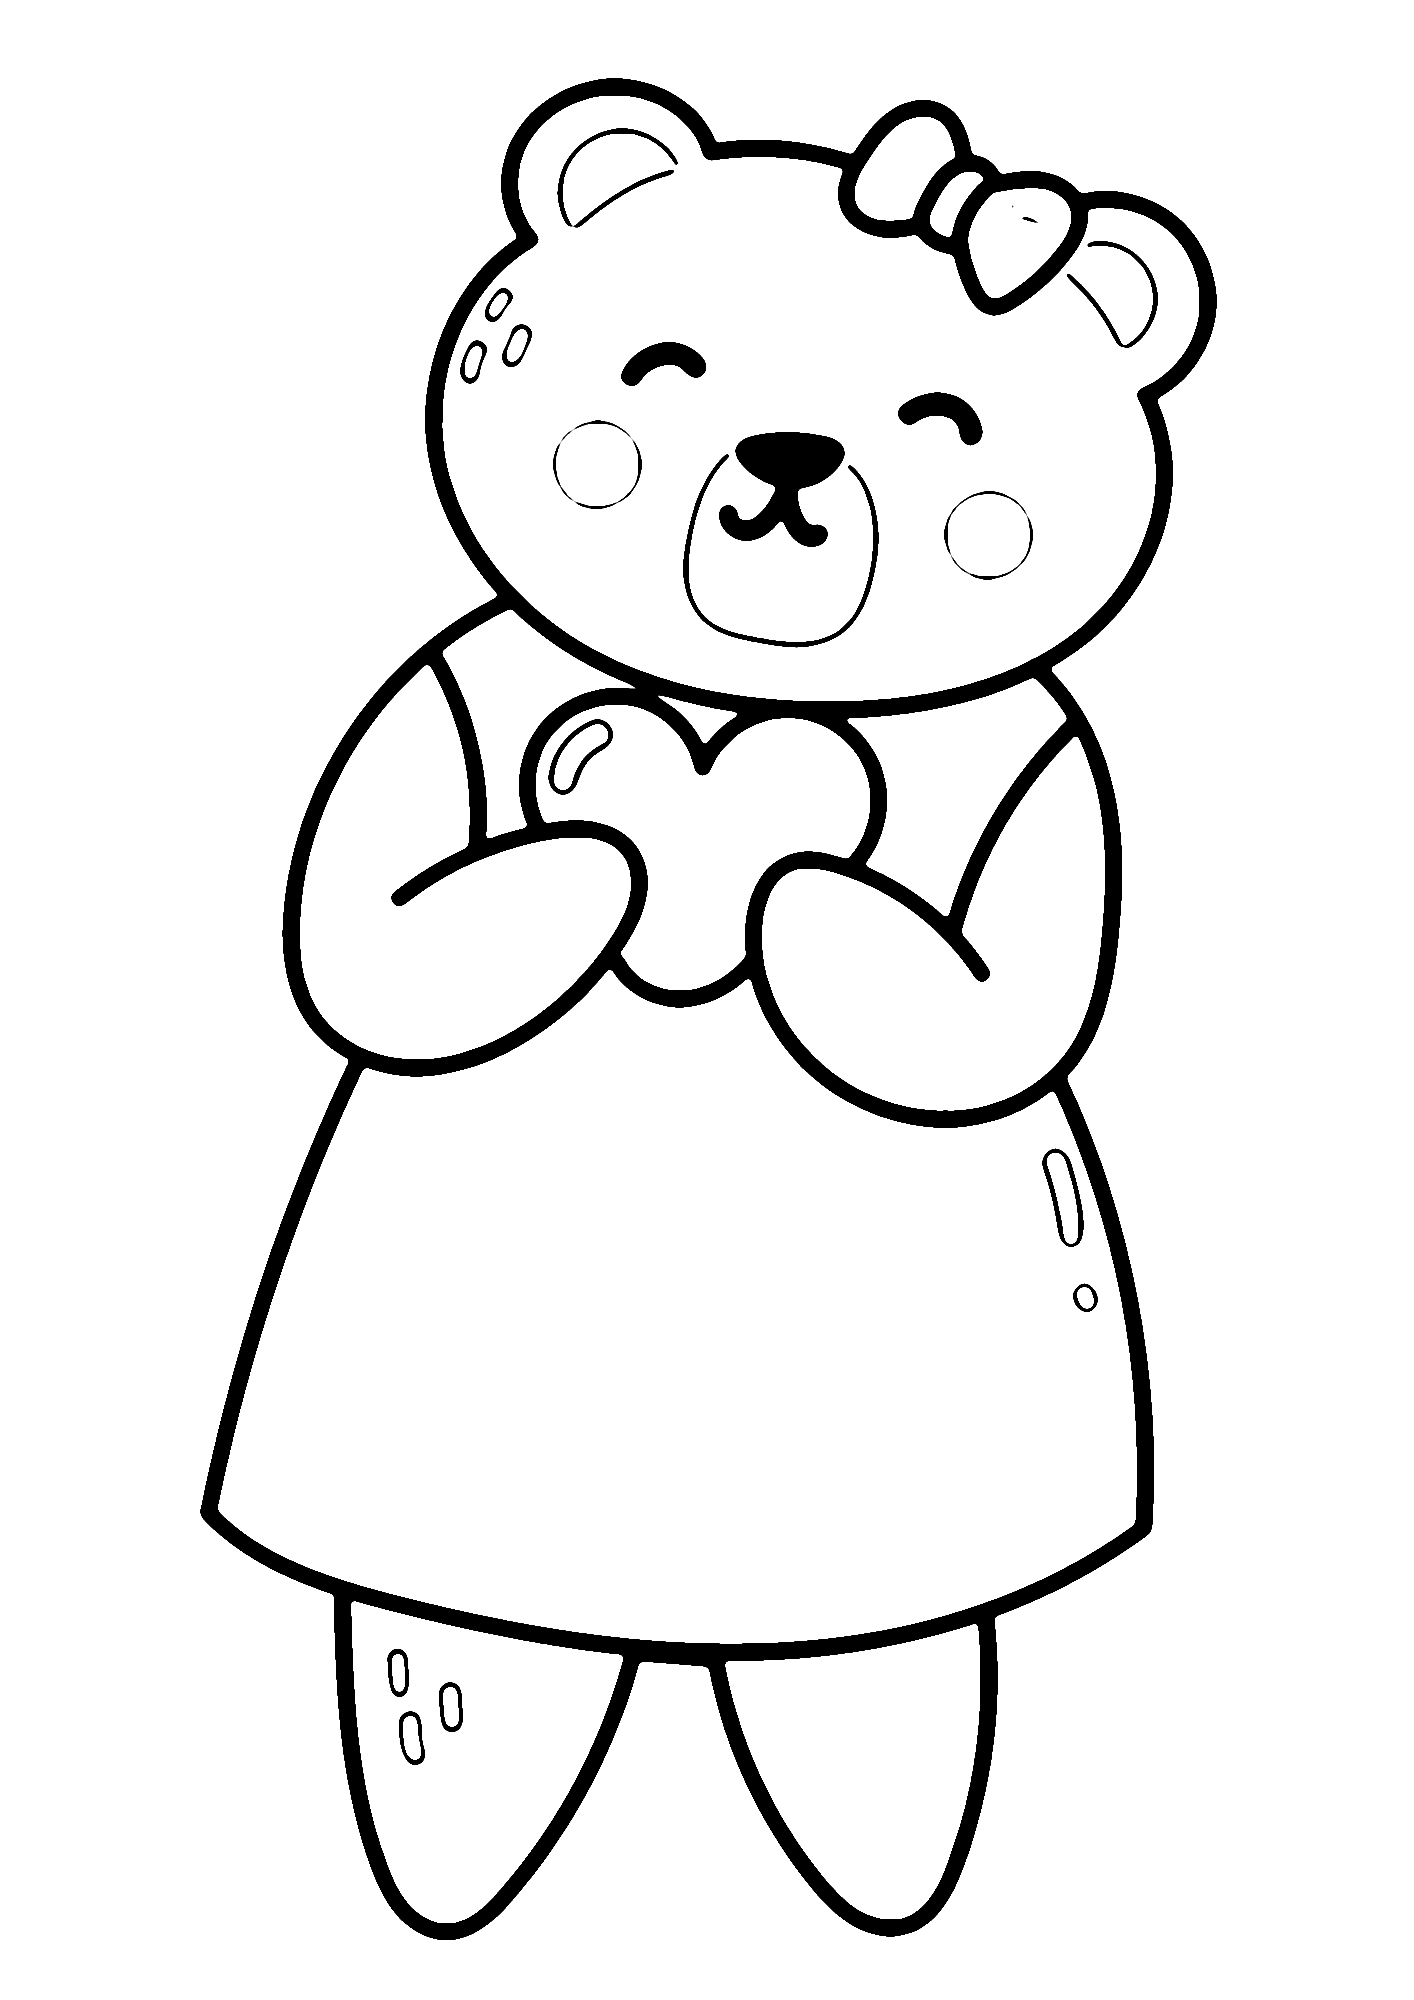 Valentine's Day Free Printable Coloring Page